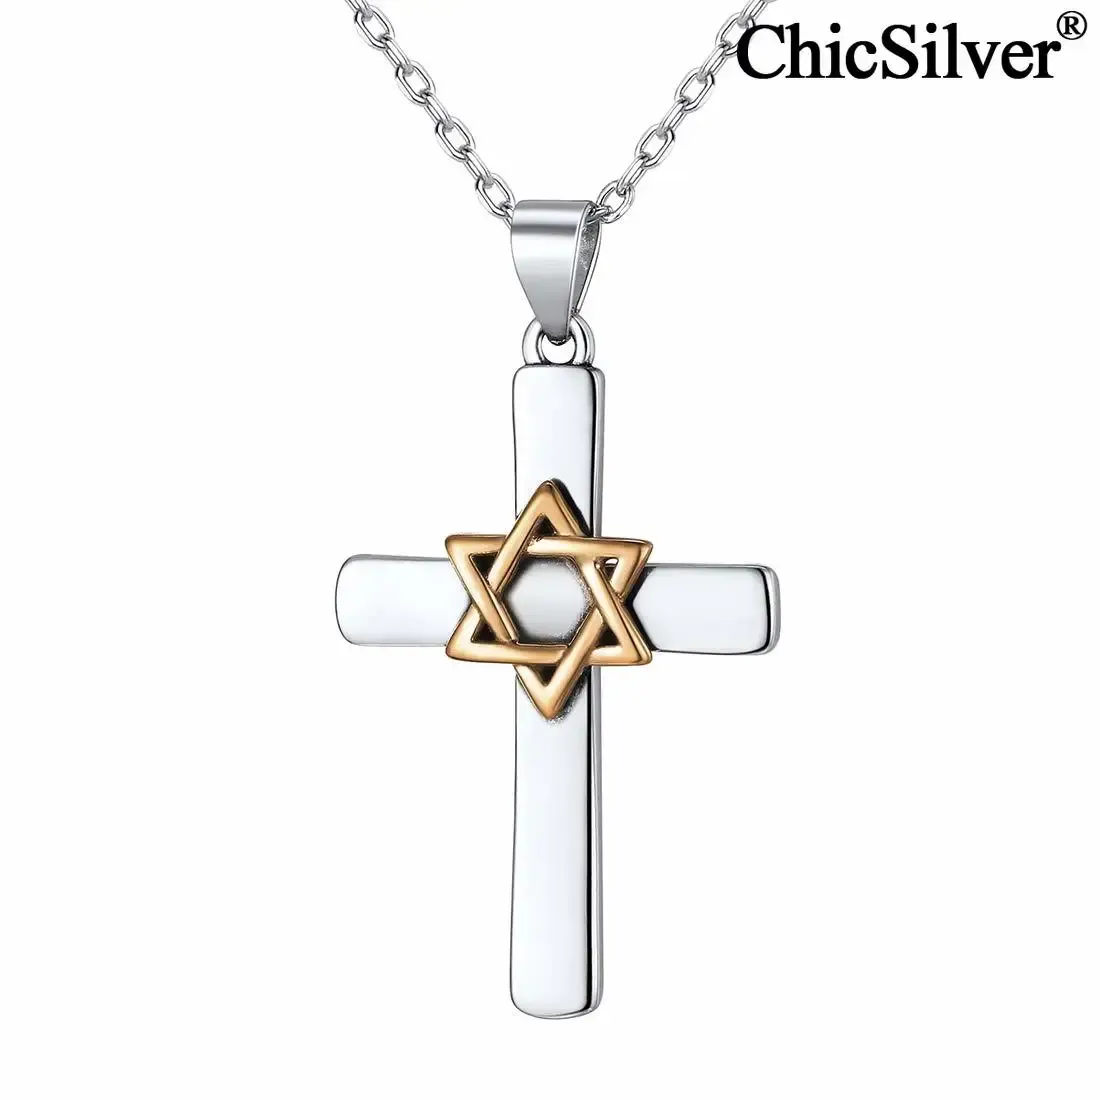 Necklaces Star of David Cross Pendant Necklace for Women Men 925 Sterling Silver Magen David Star Jewish Religious Jewelry